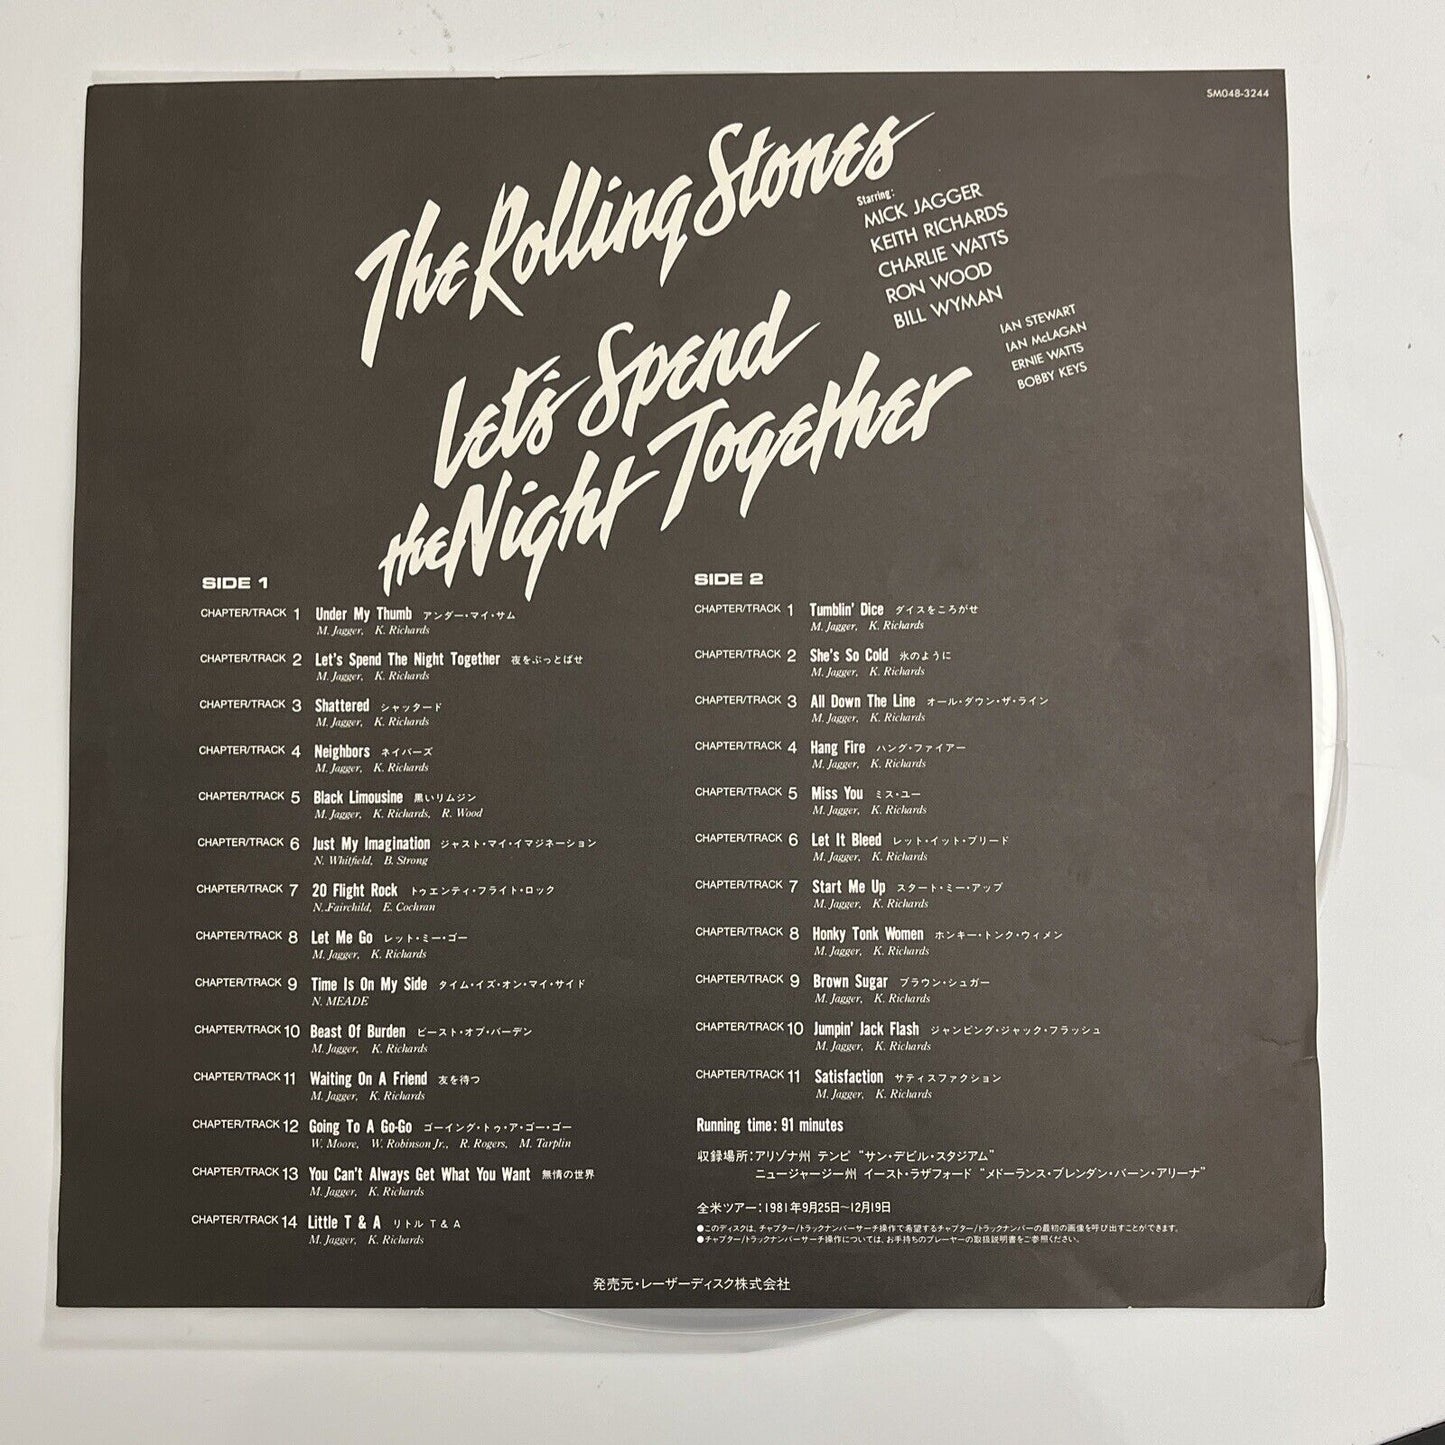 The Rolling Stones - Let's Spend The Night Together Laserdisc LD 1981